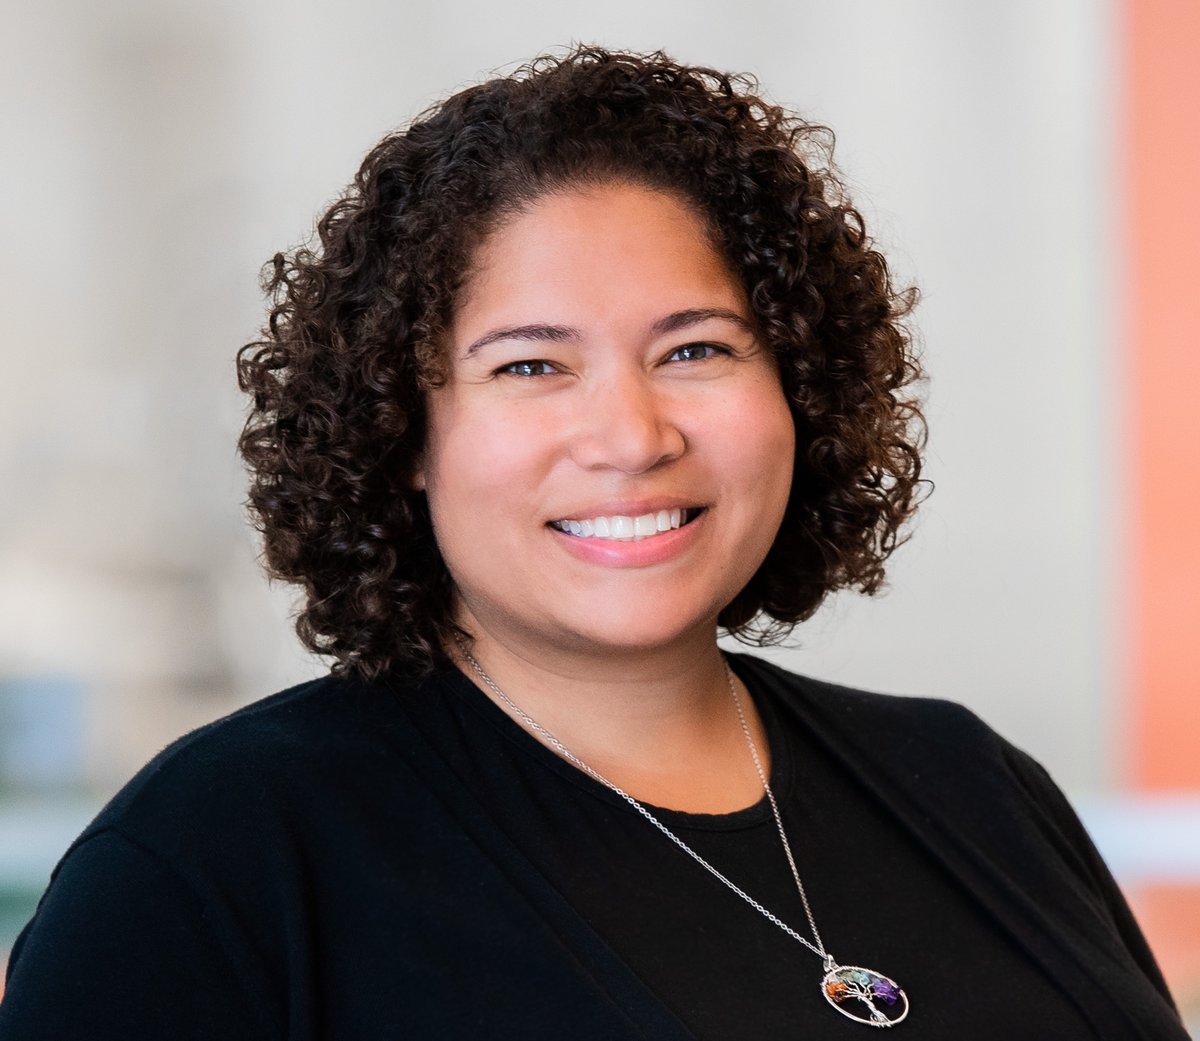 Bioethics Seminar, May 13, Noon EDT - Jennifer James, PhD, MSW, 'From Carceral Healthcare to Abolition Ethics: A Moral Obligation to Move Towards Justice'. Open to all. Lunch provided. Join in person: Feinstone Hall, @JohnsHopkinsSPH. Link for details: mailchi.mp/jhu/bioethics-…